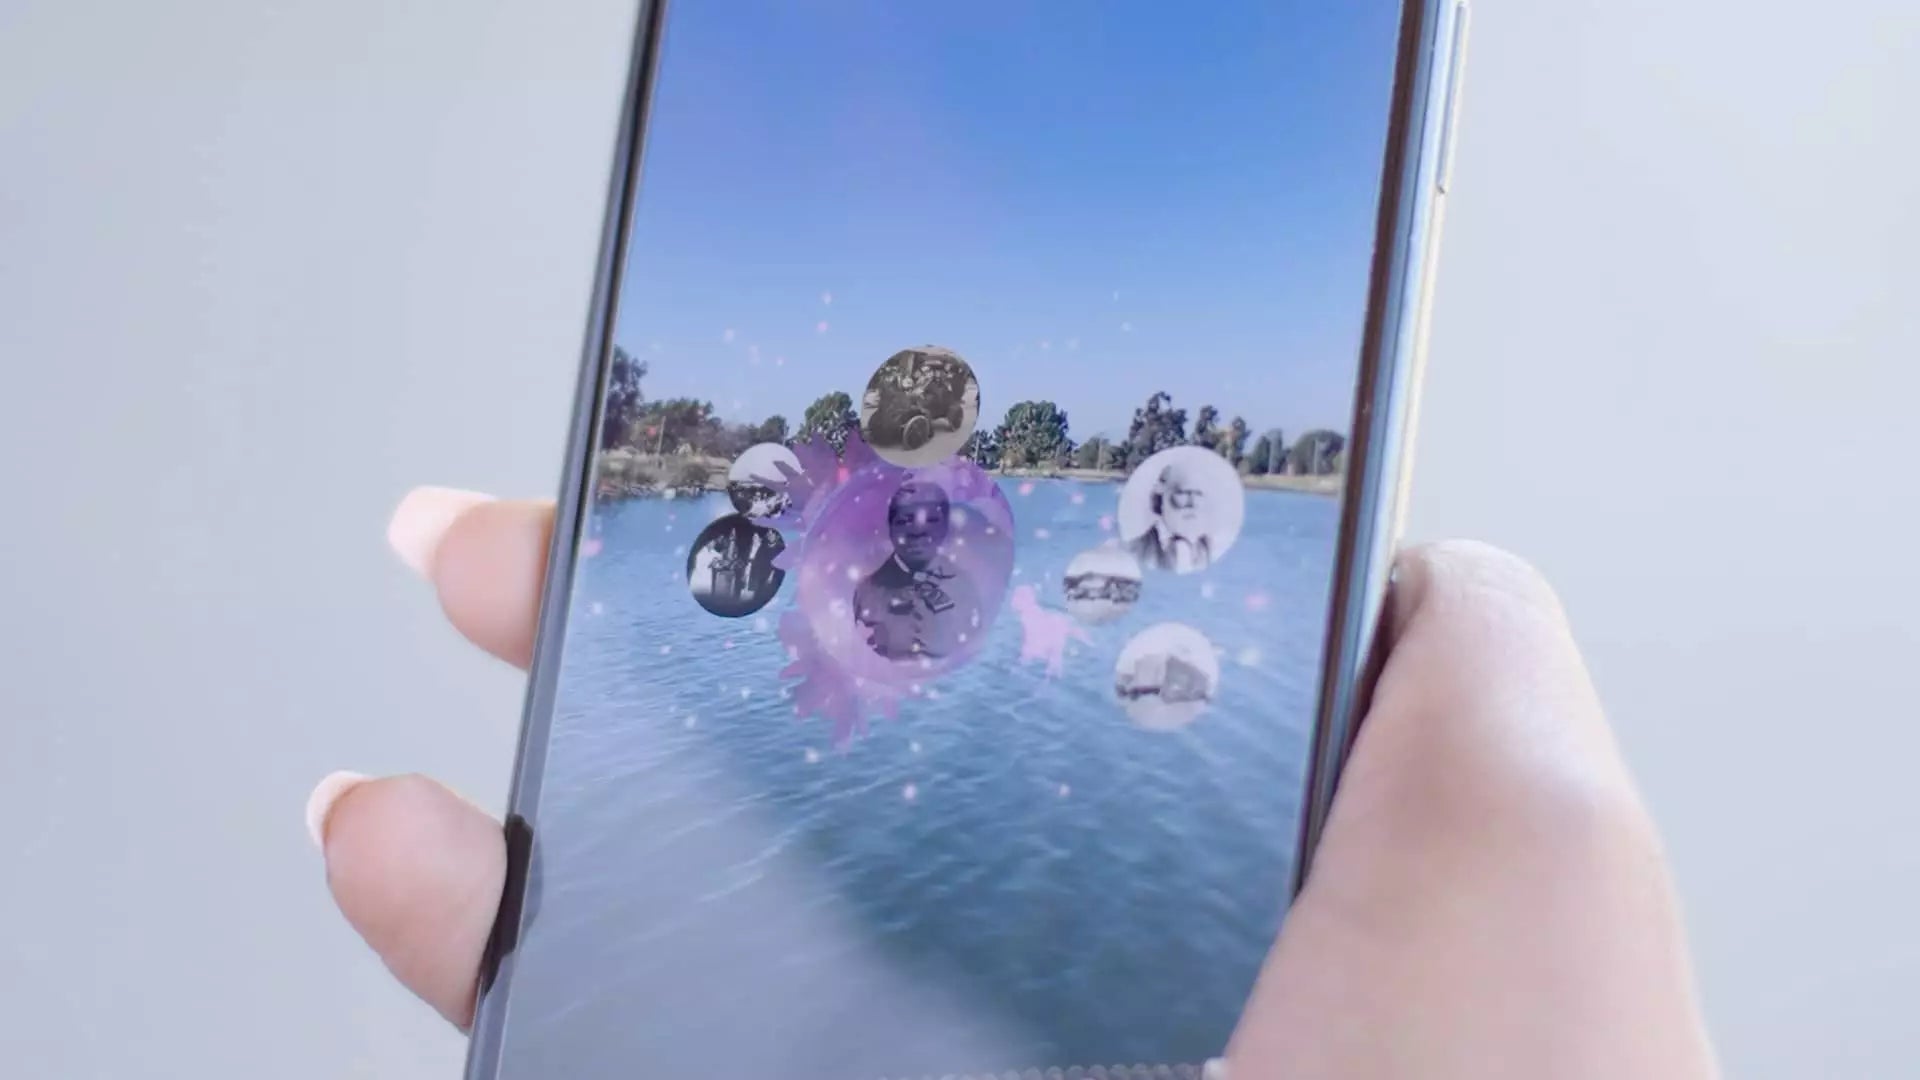 4 Ways Mobile AR is Making Waves Today